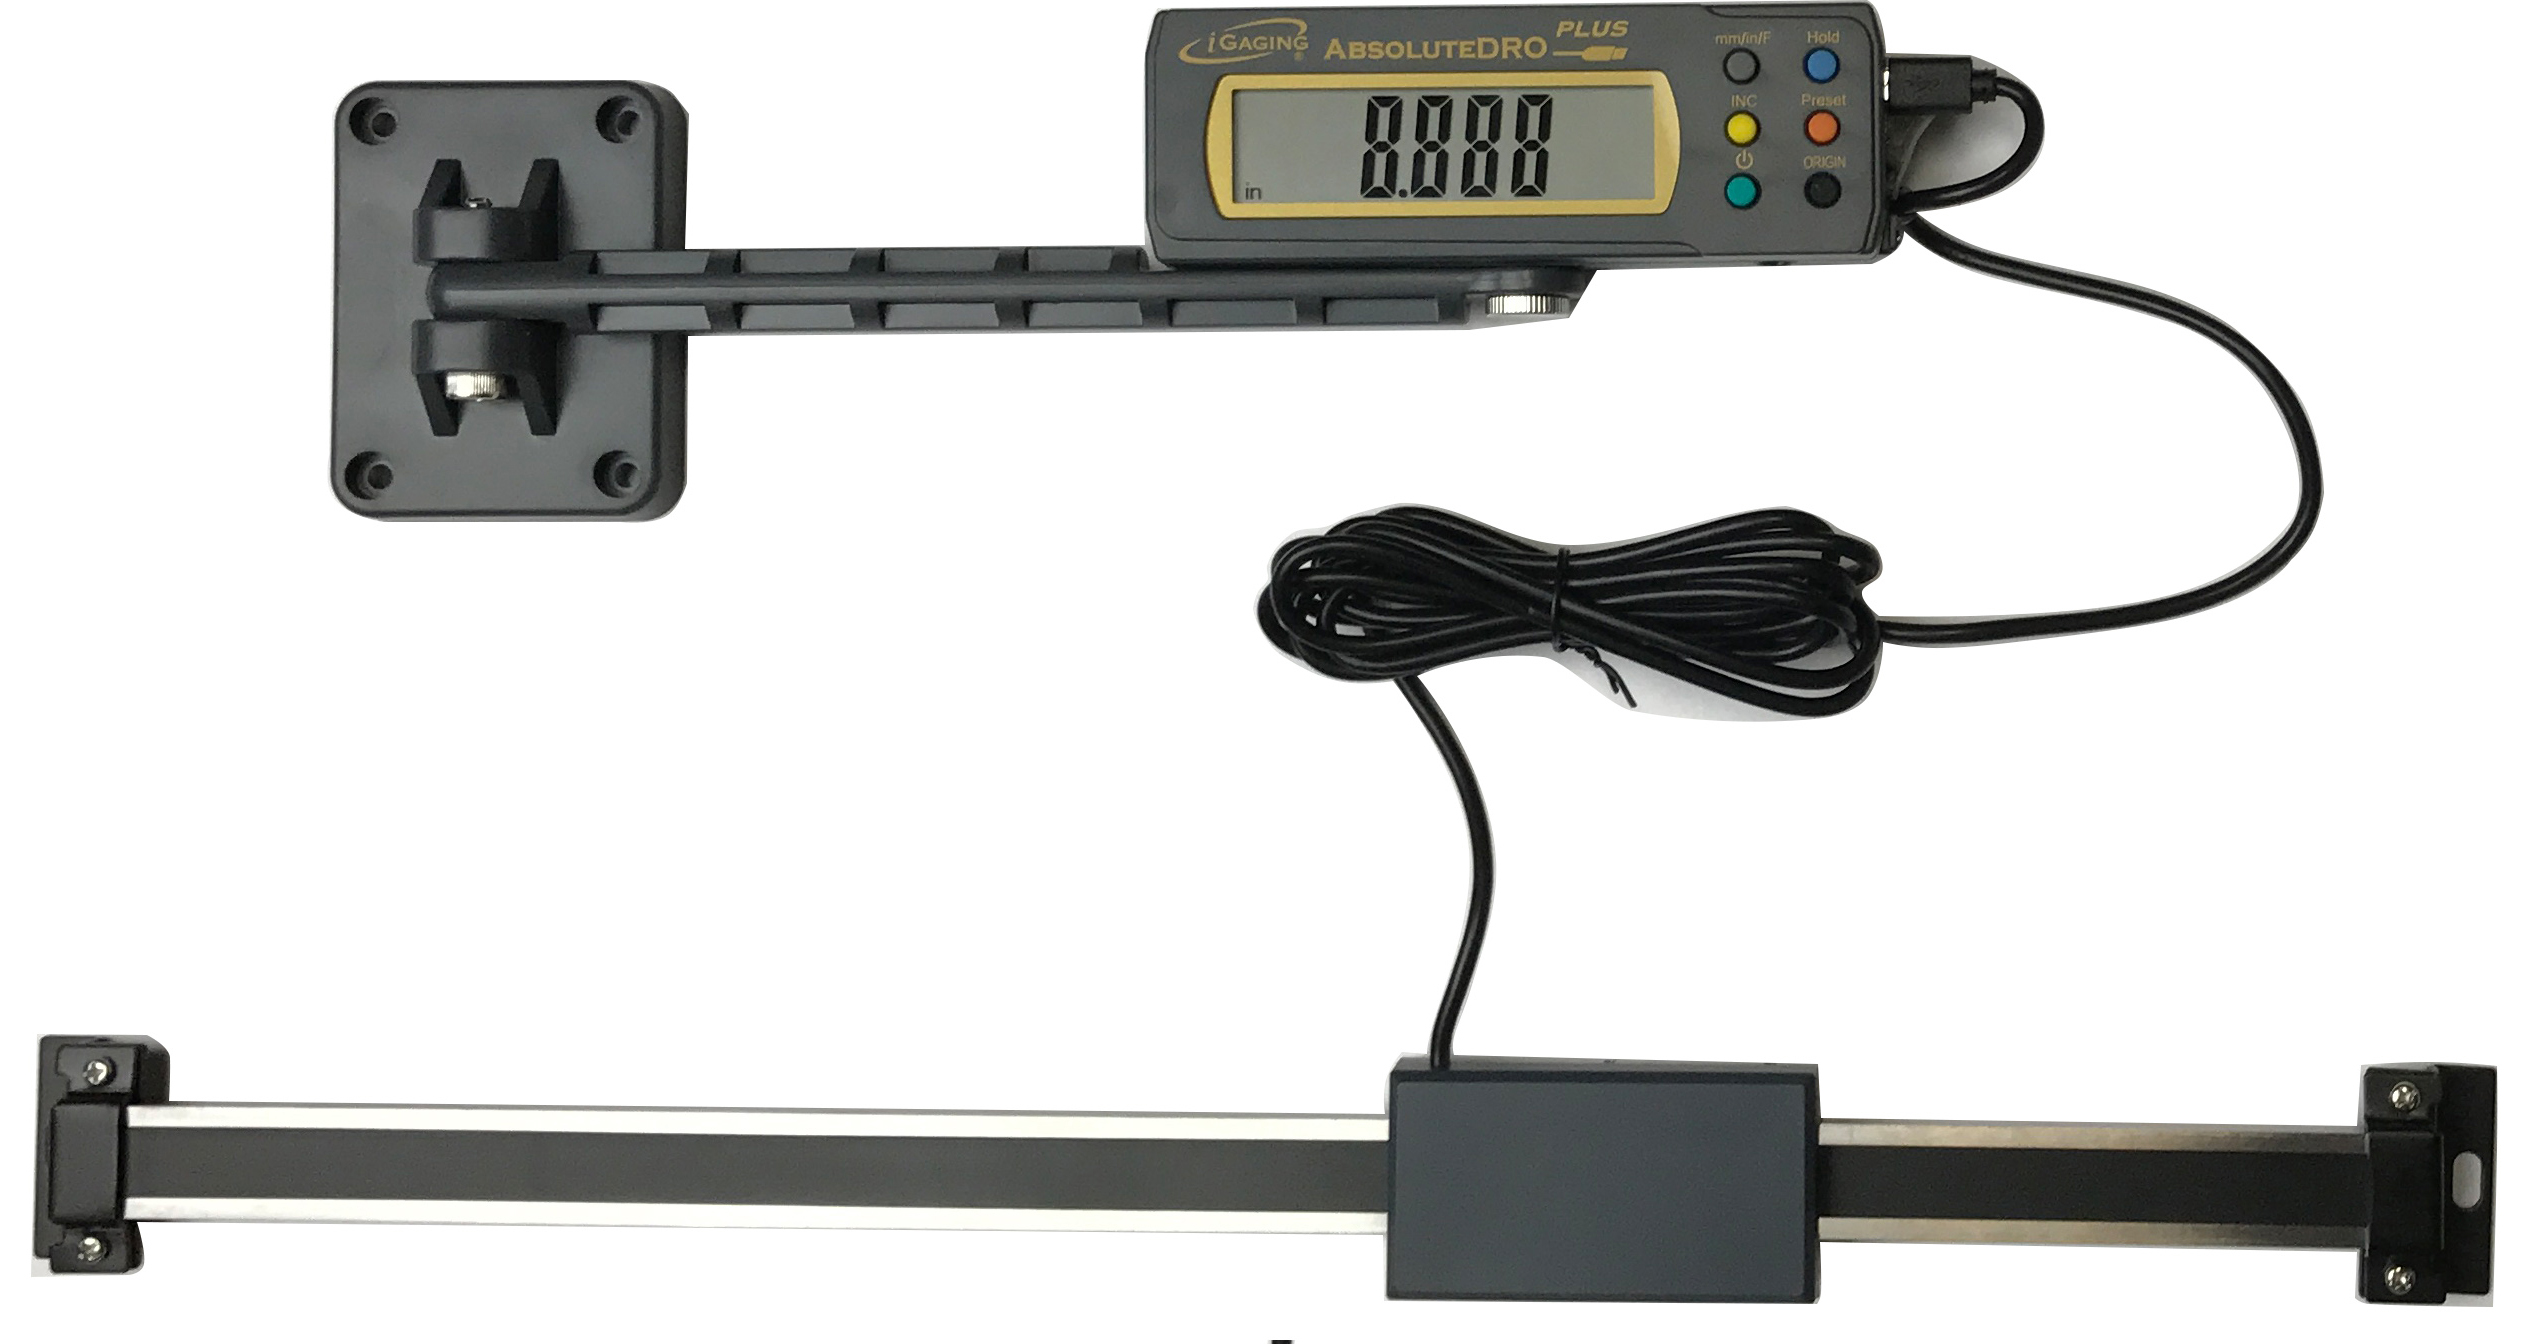 Absolute DRO Digital Readout 6"/150mm Read Out Stainless Steel Beam